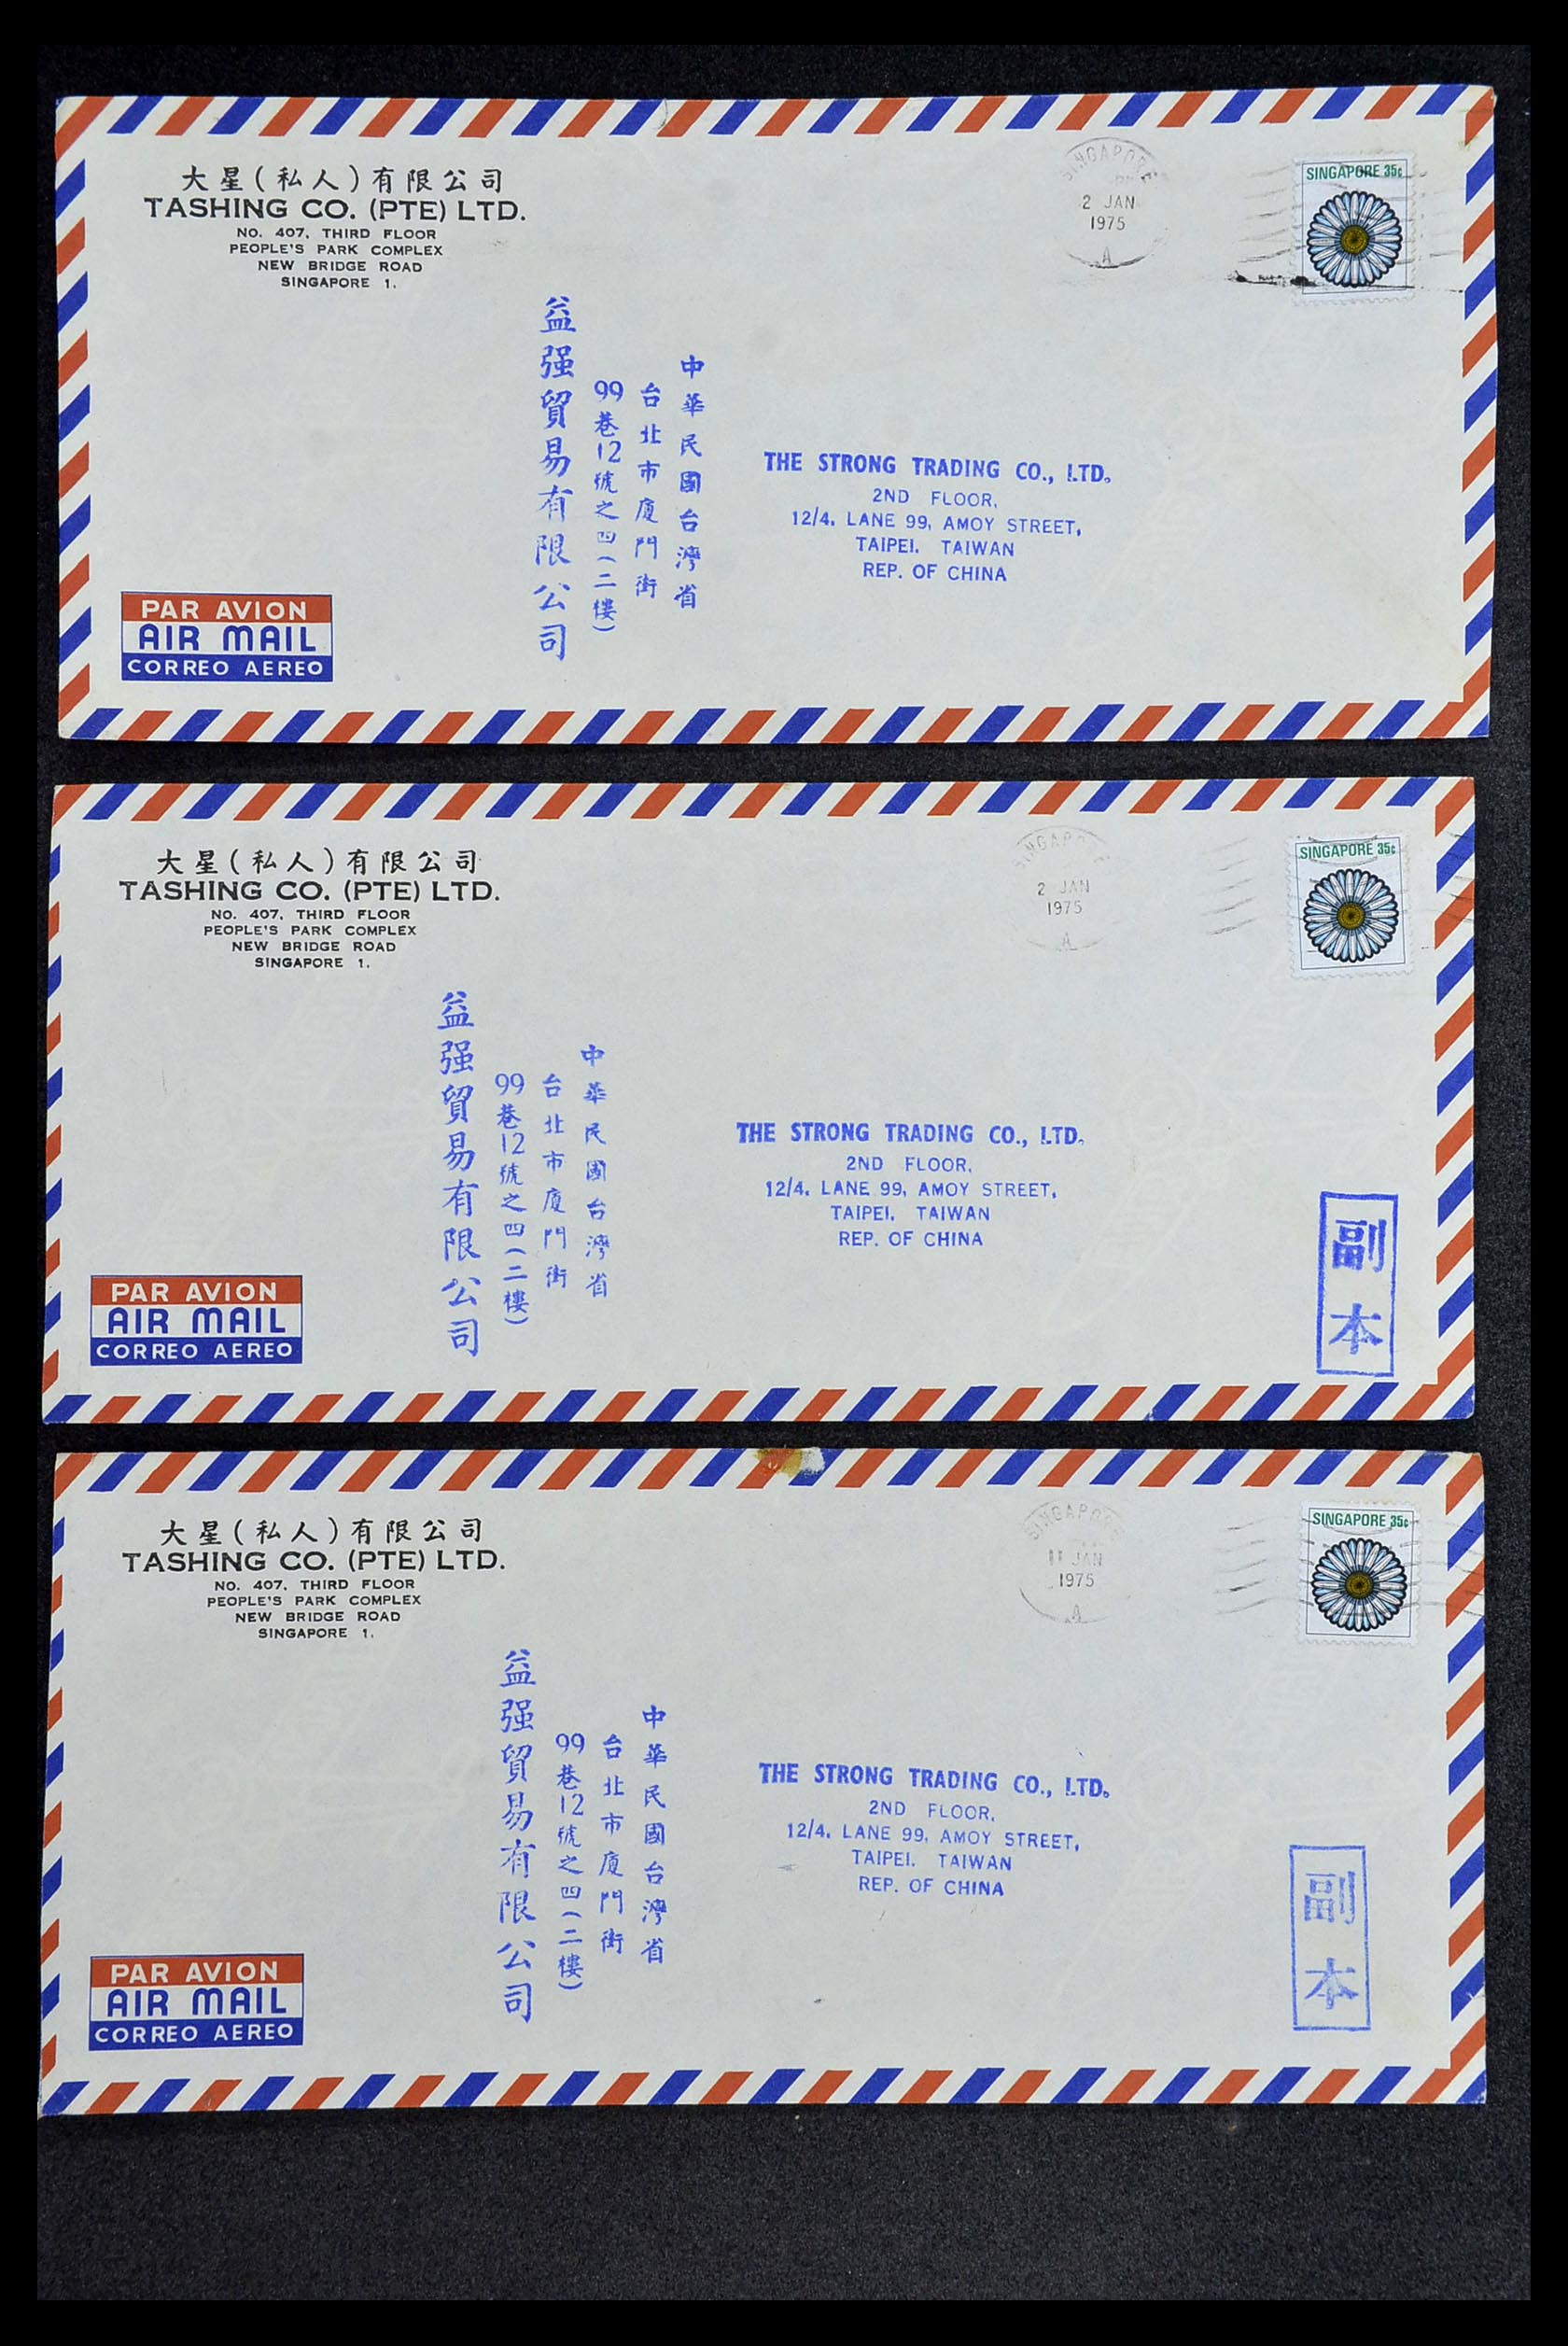 34402 093 - Stamp collection 34402 Taiwan covers 1960-2000.